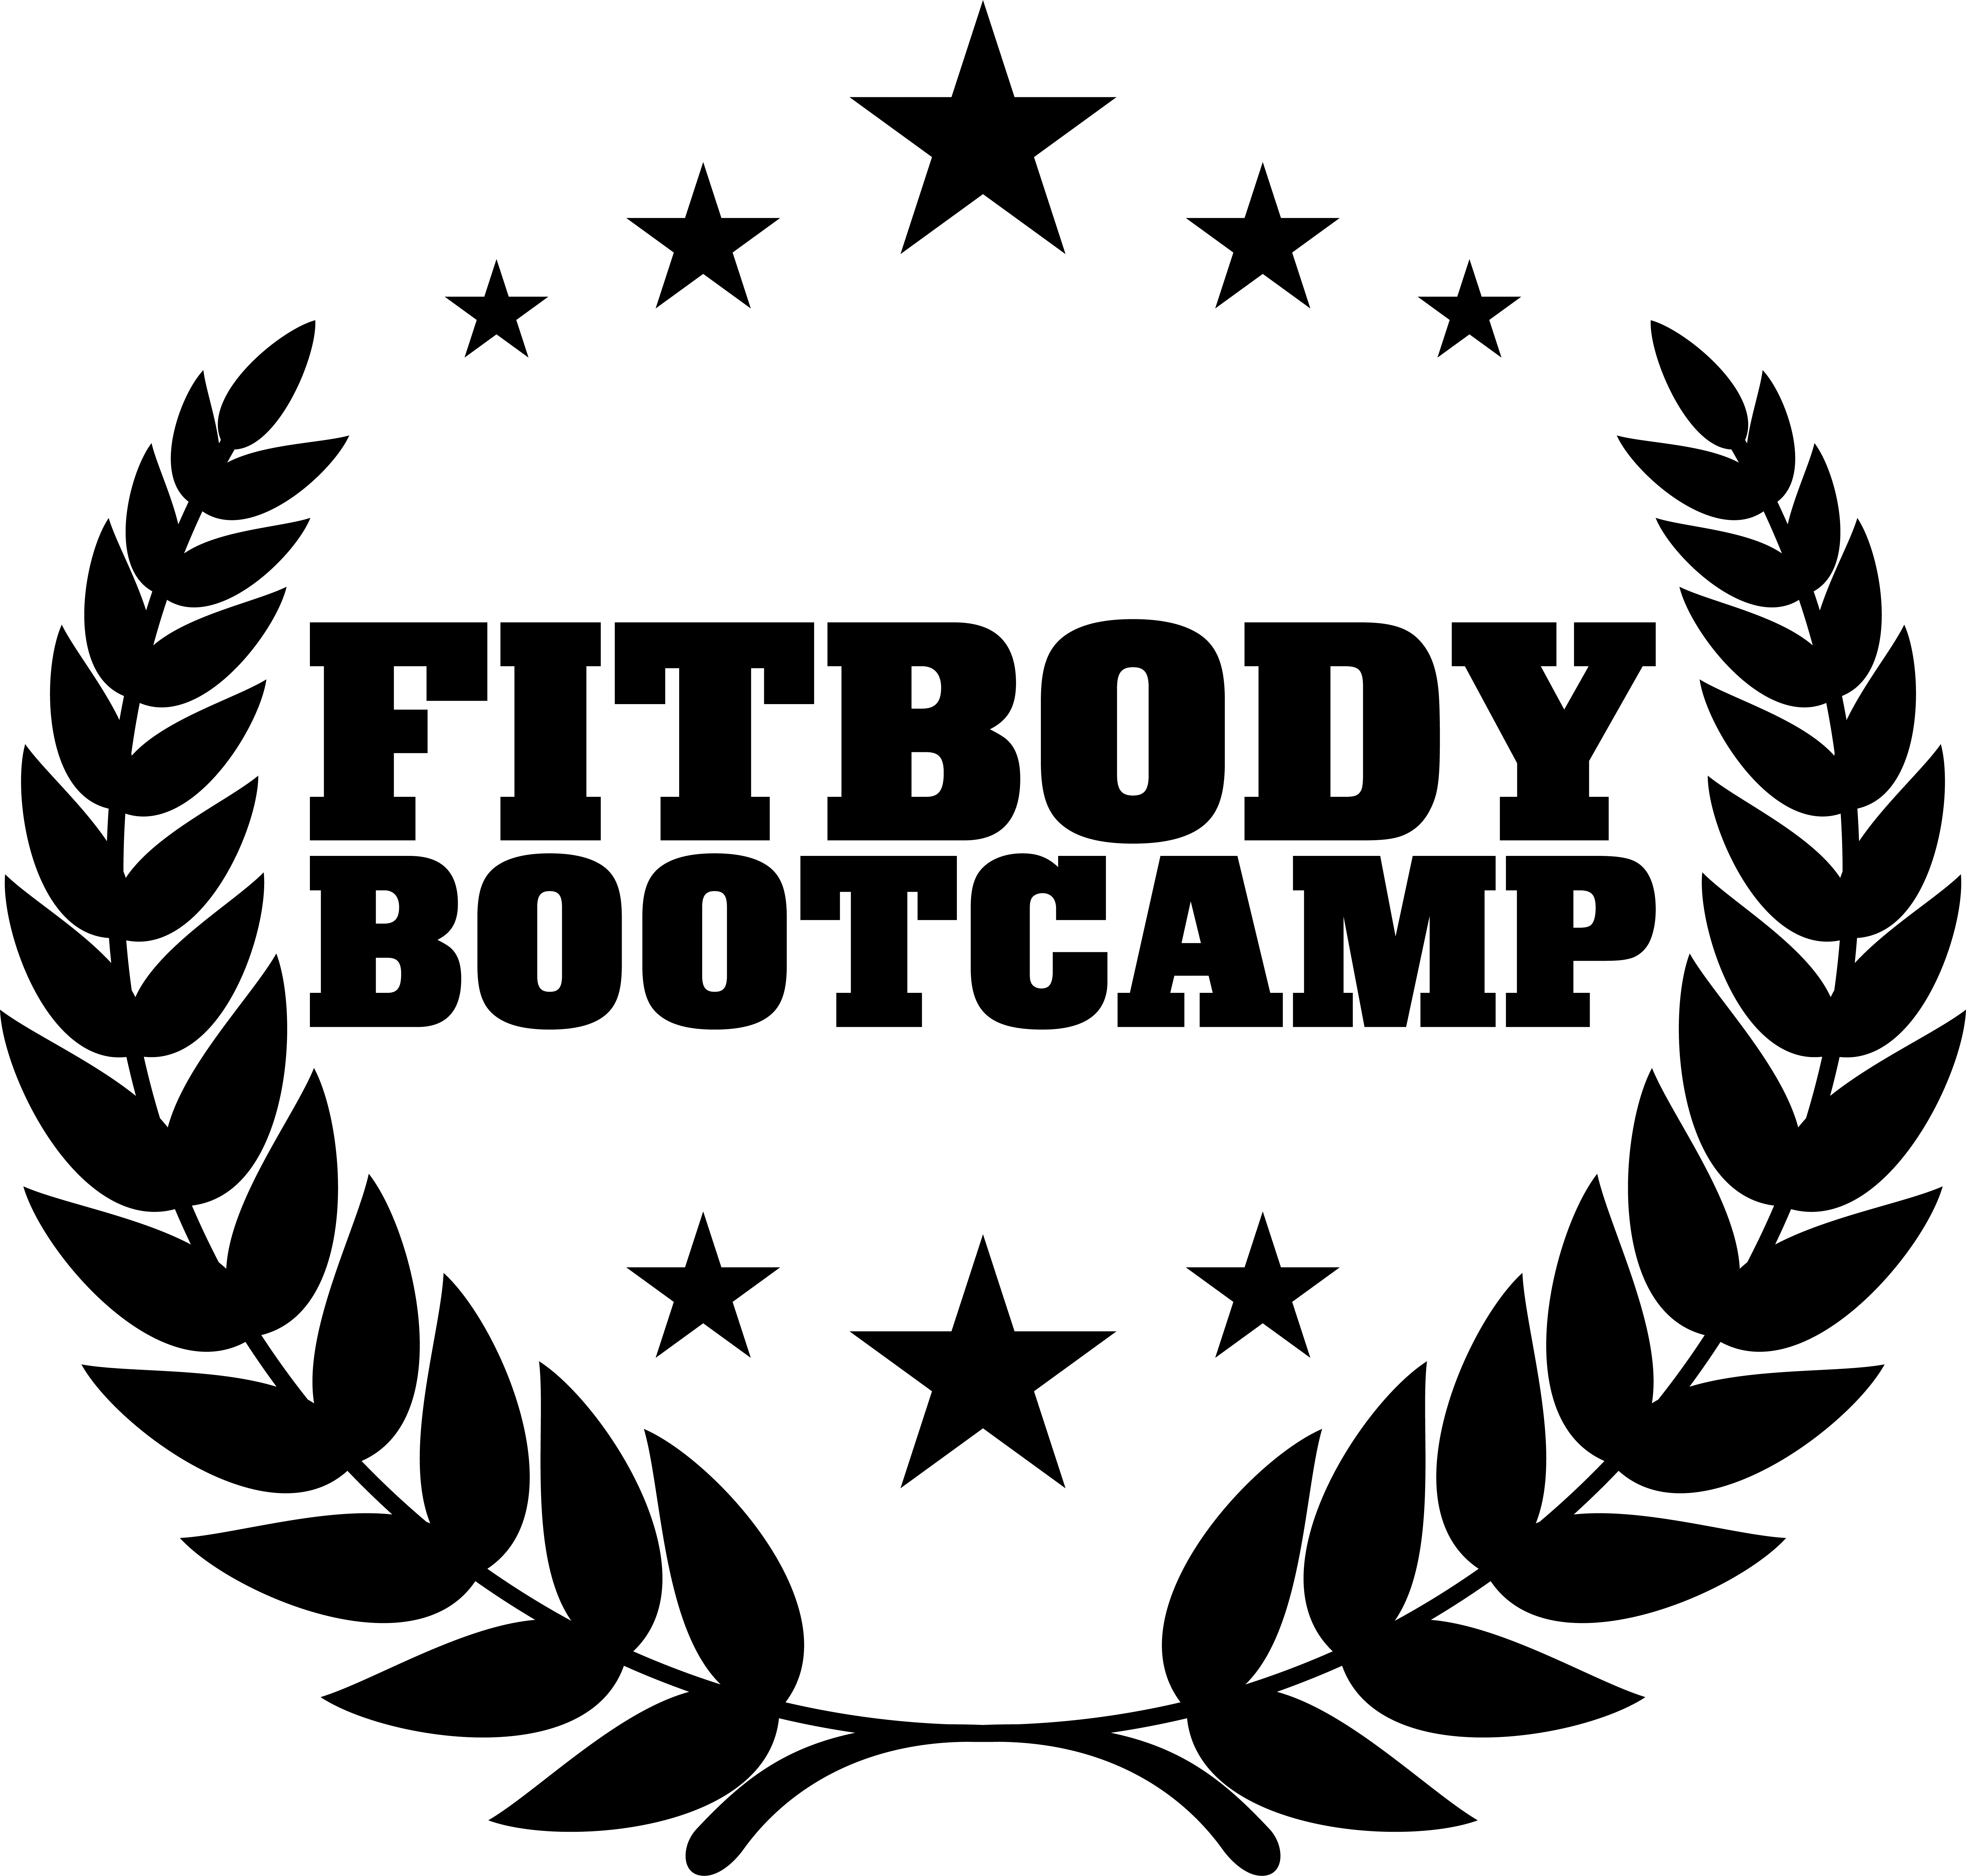 FACEBOOK FRIDAY FREEBIE! ENTER TO WIN A 2 WEEK UNLIMITED PASS TO SANDY PLAINS FIT BODY BOOT CAMP